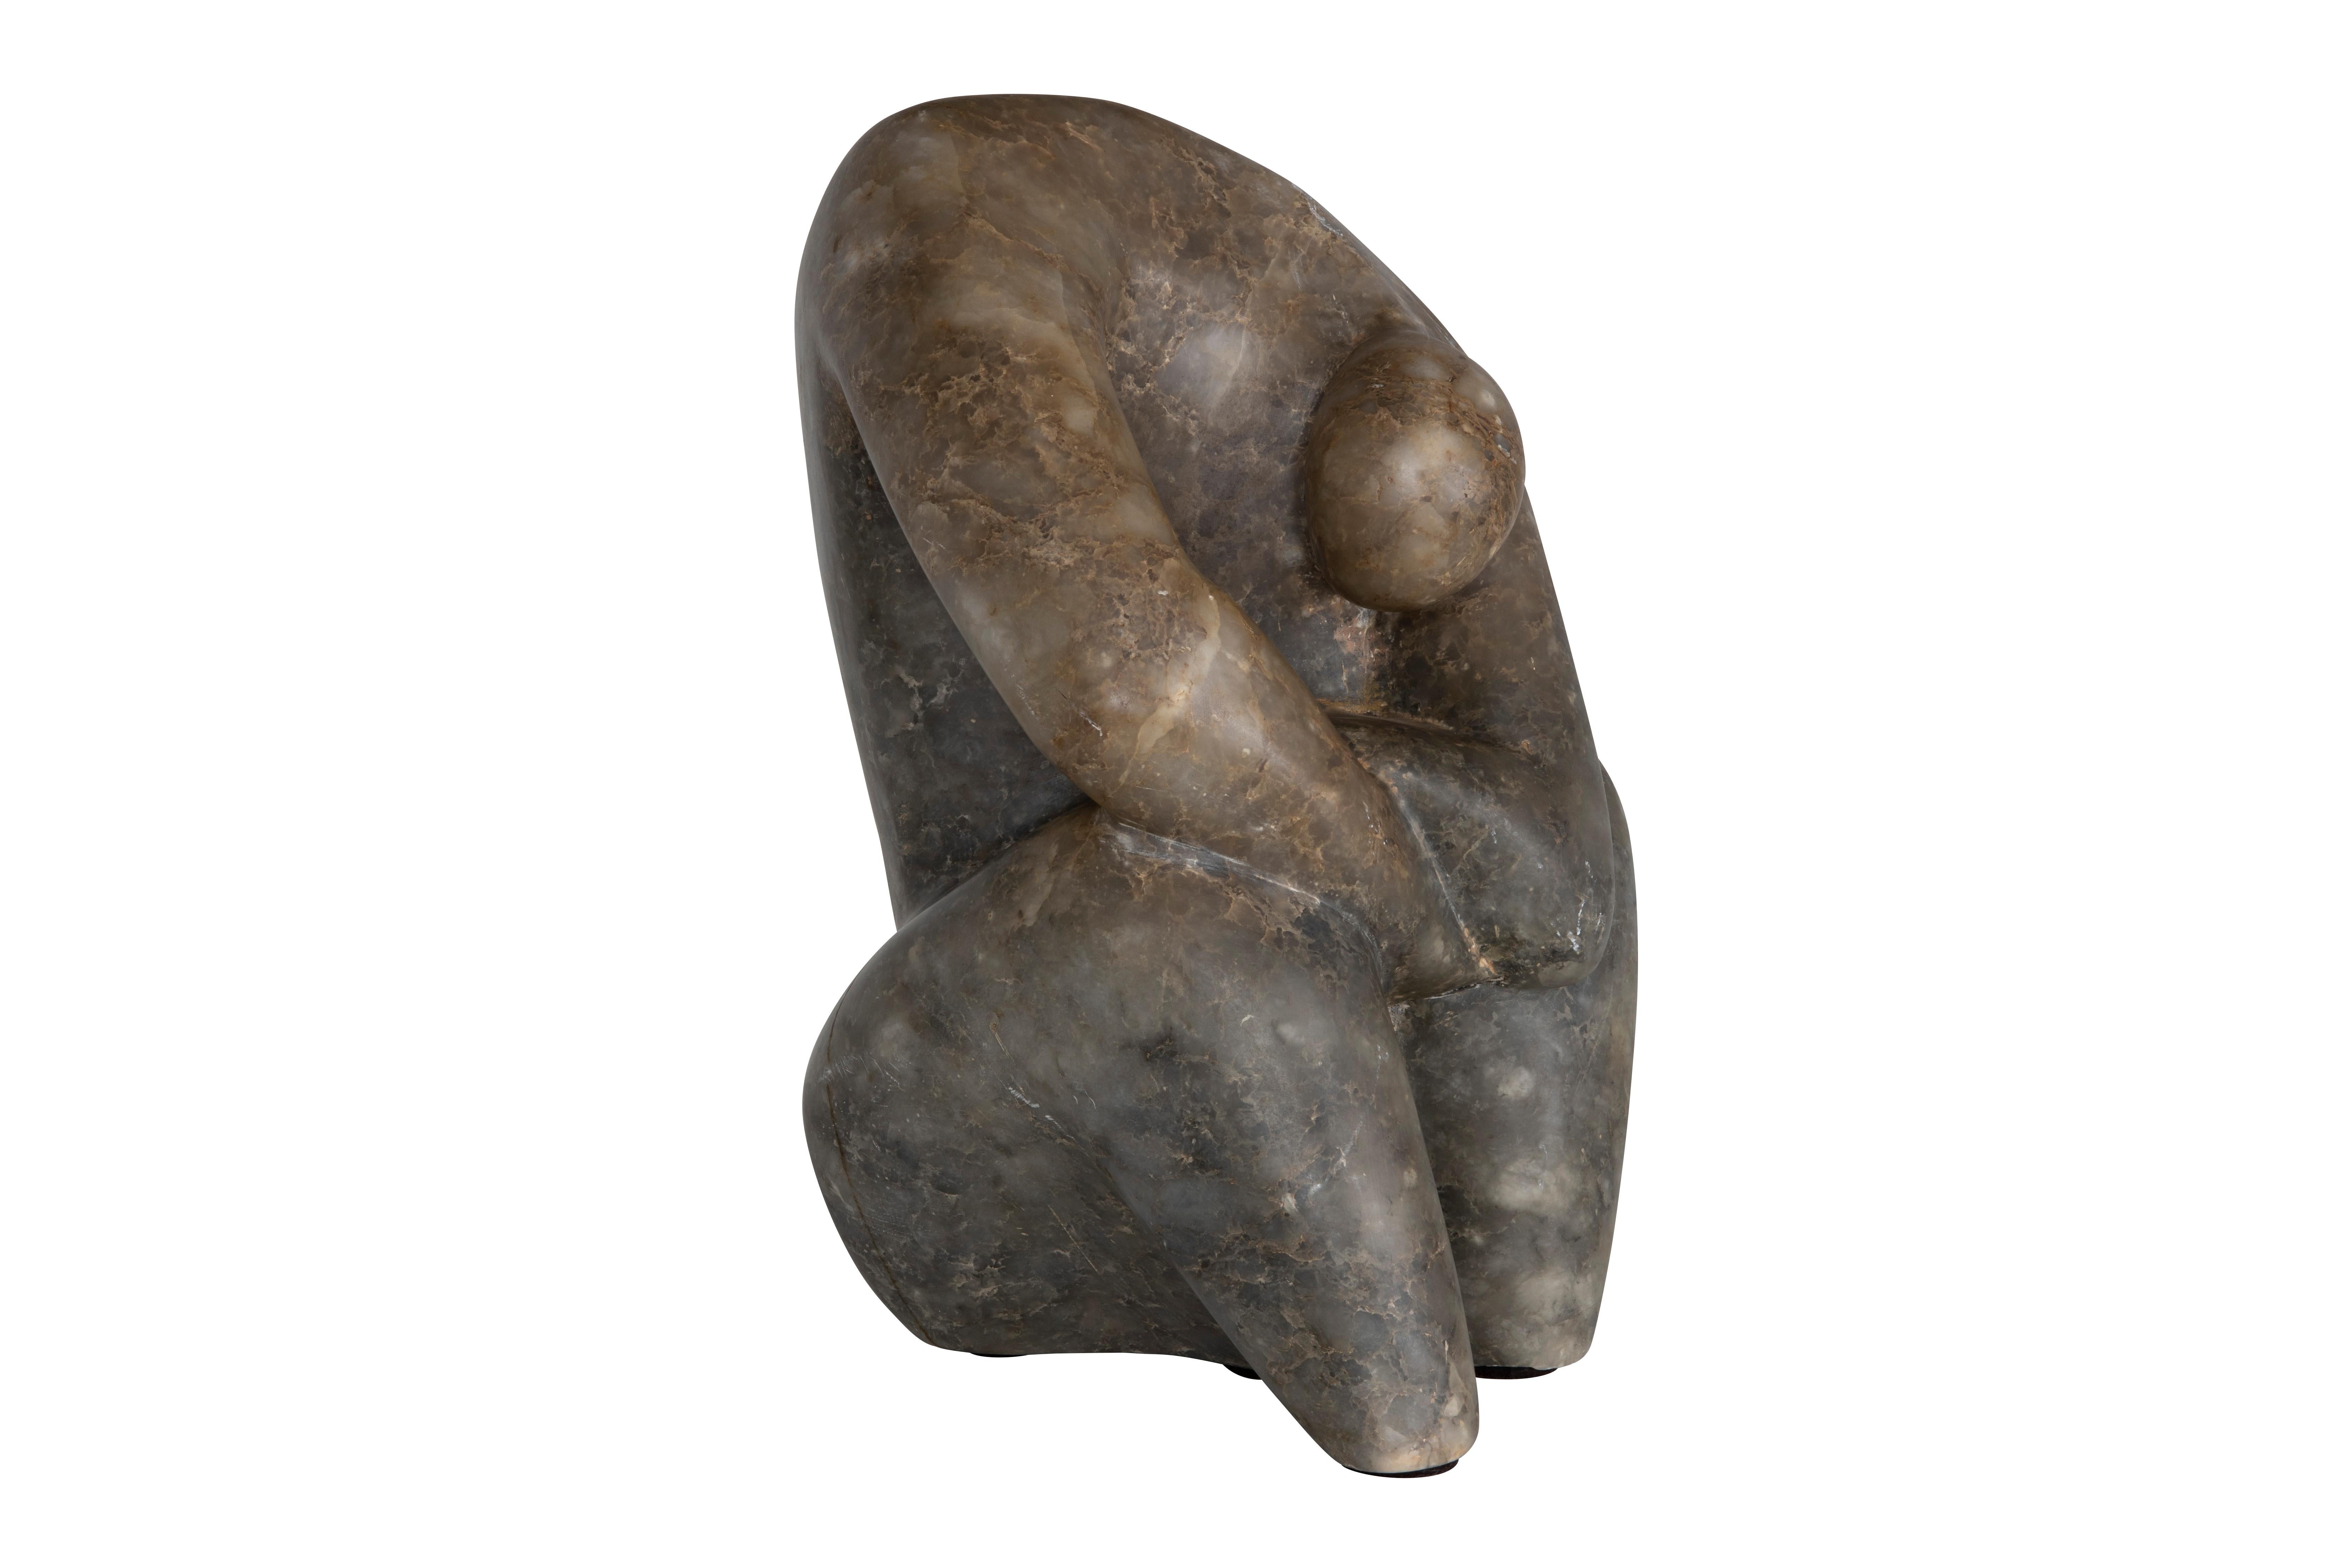 Rare organic modern abstract sculpture depicting a crouched human figure. Hand-carved from a single piece of dark marble stone with gorgeous and intricate coloring. This monumental piece is in fair condition with minor scratching near the base.